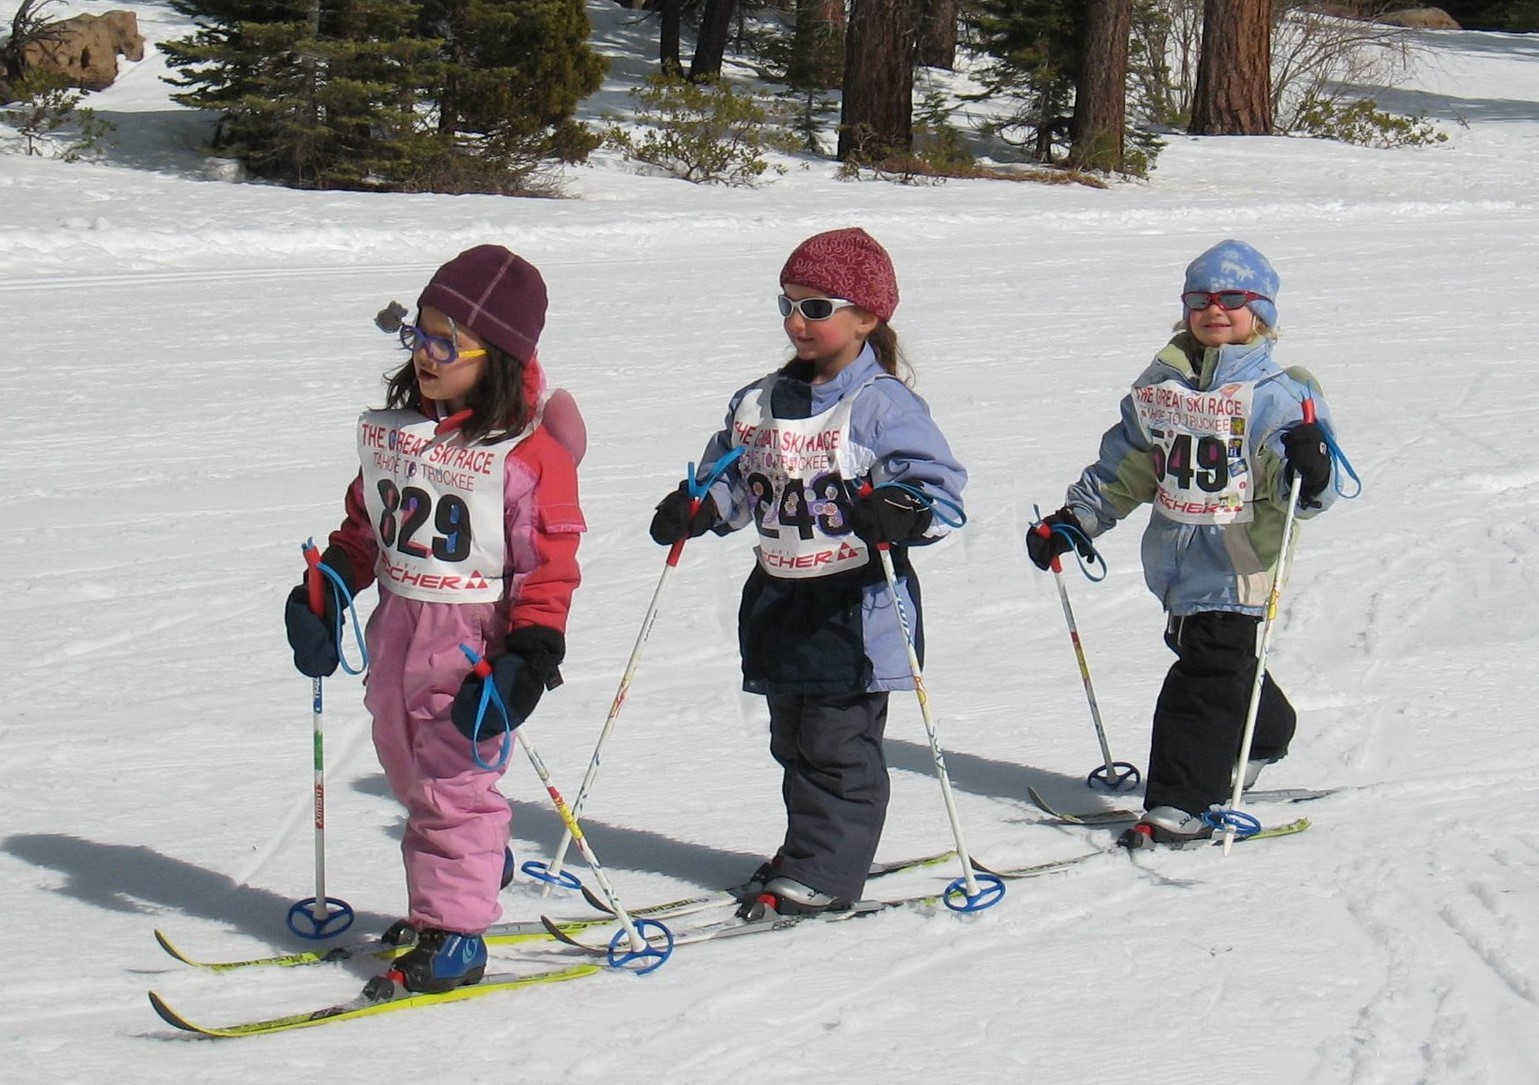 Lola, Lily and Annika skiing when kids